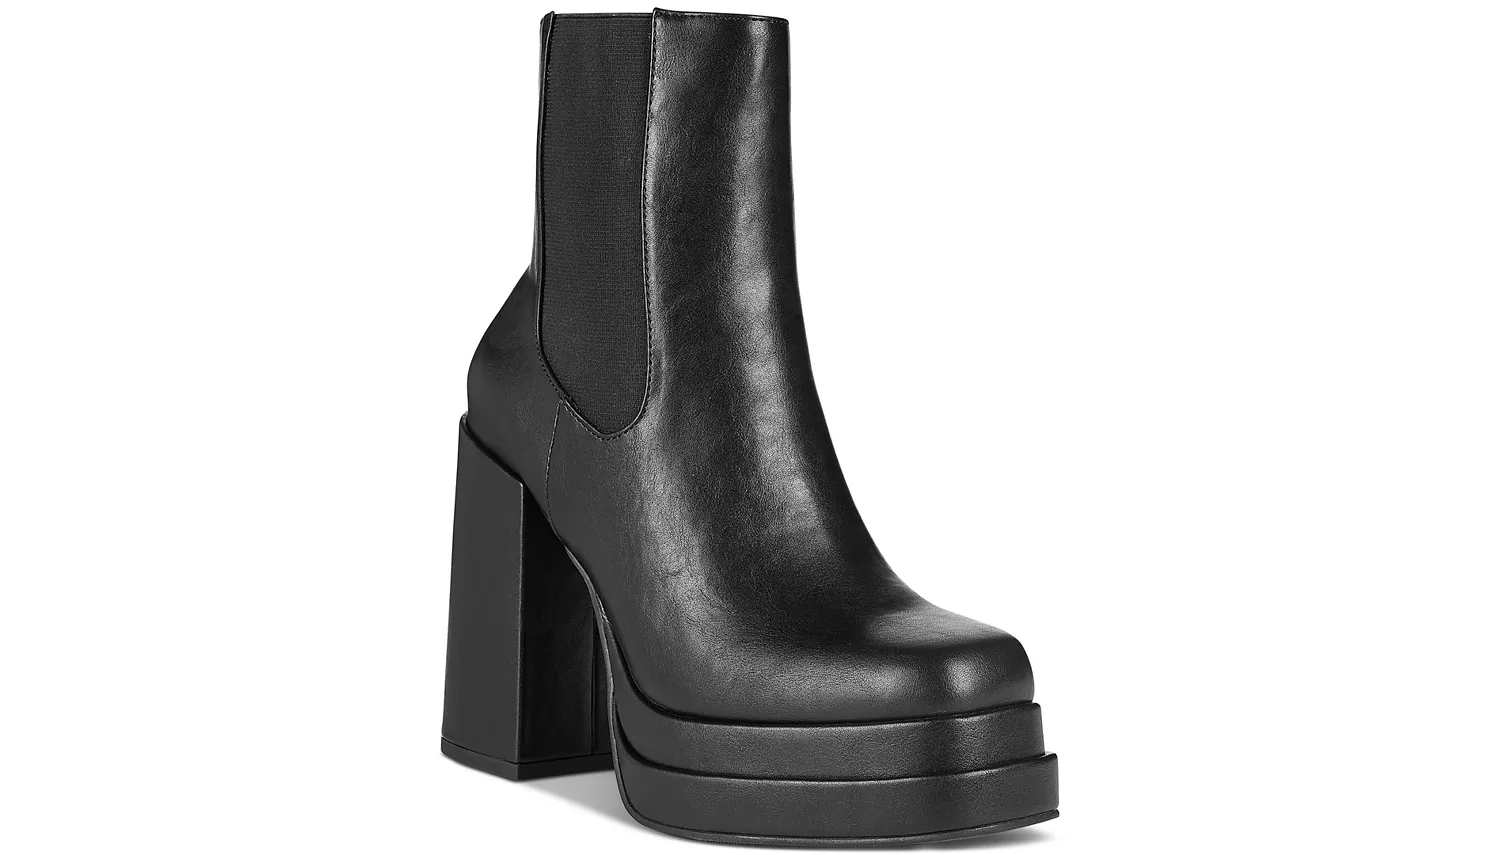 ohara double-platform booties dupe